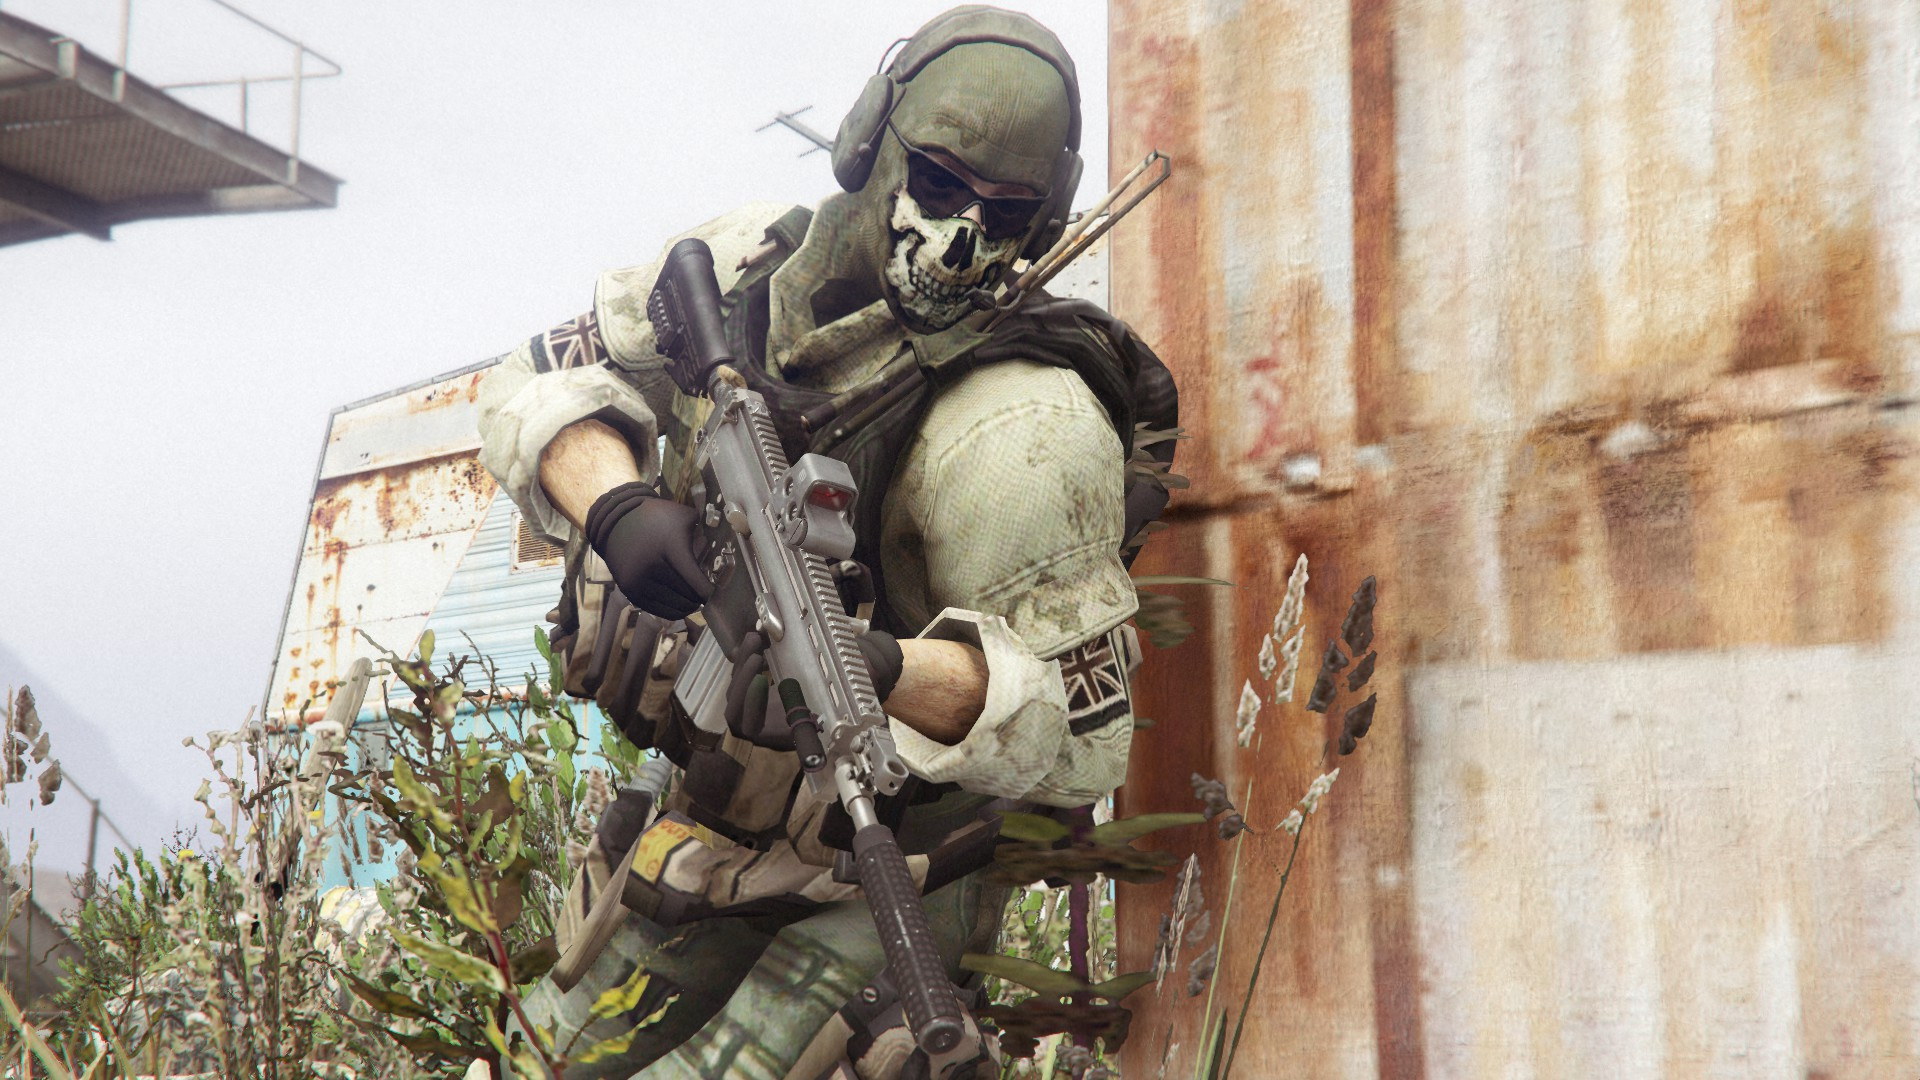 Simon Ghost Riley - Modern Warfare II at Ready or Not Nexus - Mods and  community